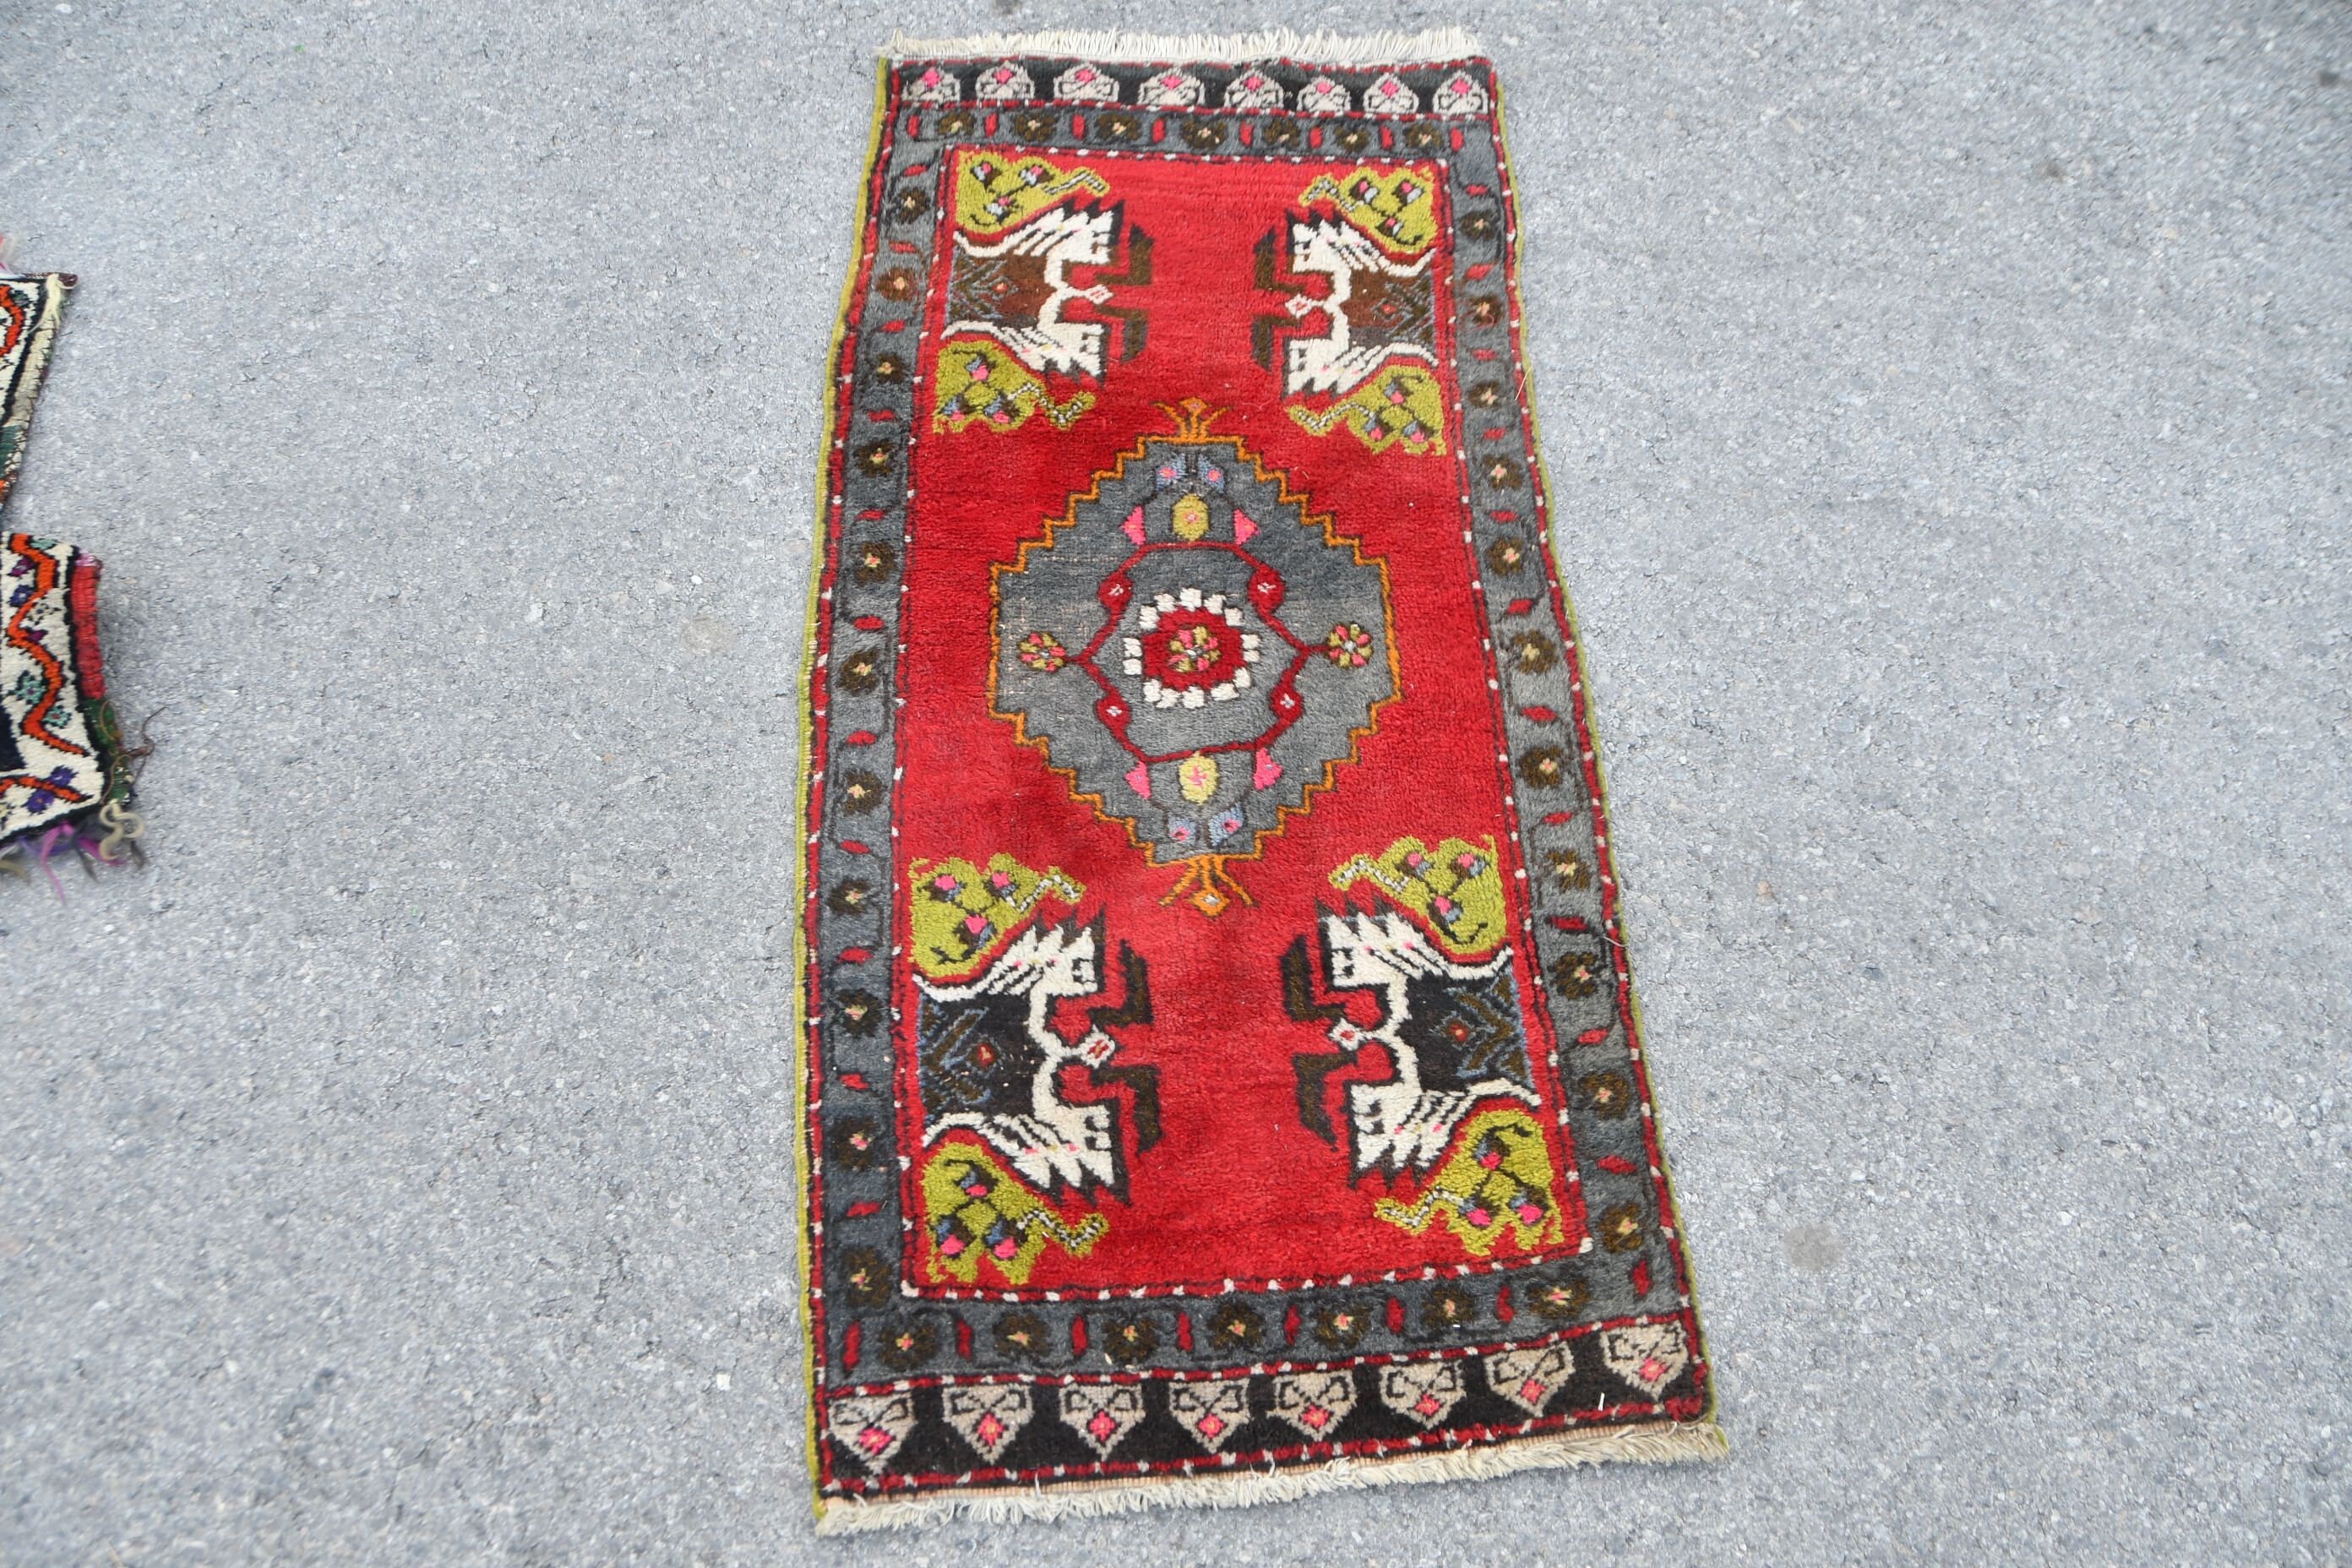 Entry Rug, Cool Rug, Muted Rug, Bedroom Rug, Vintage Rugs, Turkish Rug, Wool Rug, Rugs for Entry, 1.8x3.8 ft Small Rug, Red Moroccan Rugs